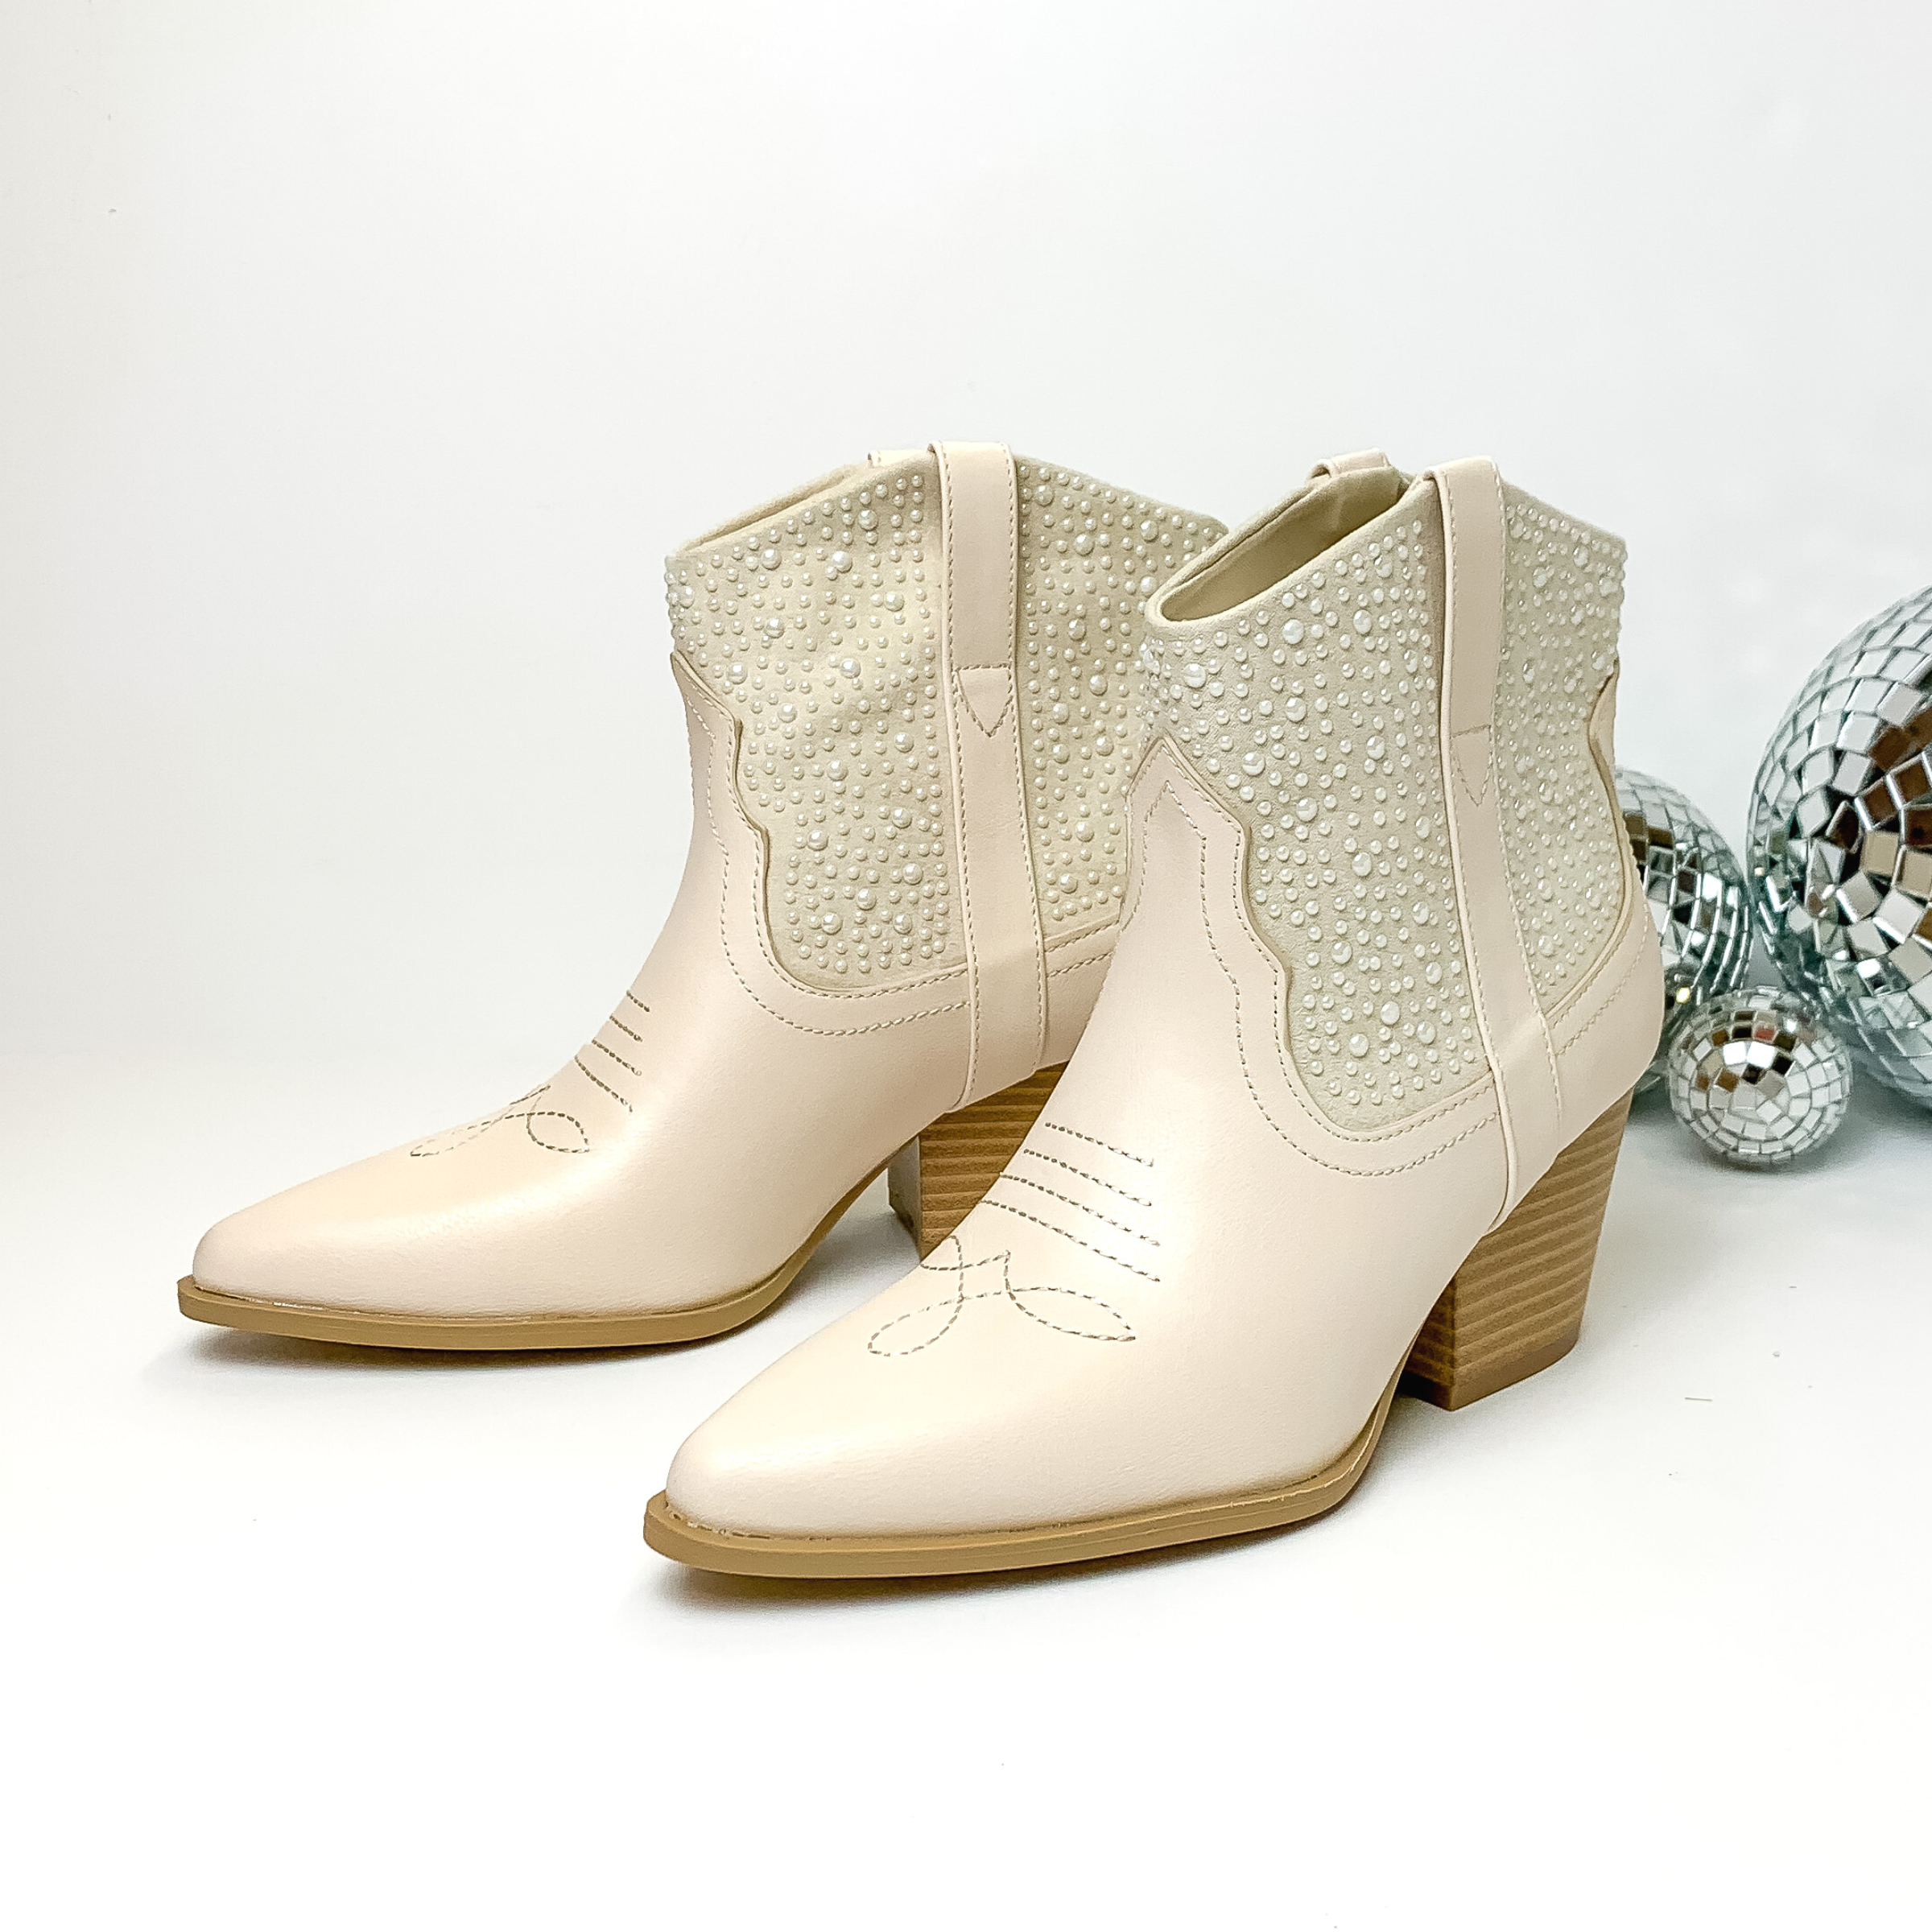 Ivory ankle boots with white pearl embellishment and tan heel. These boots are pictured on a white background with disco balls to the right of the boots.